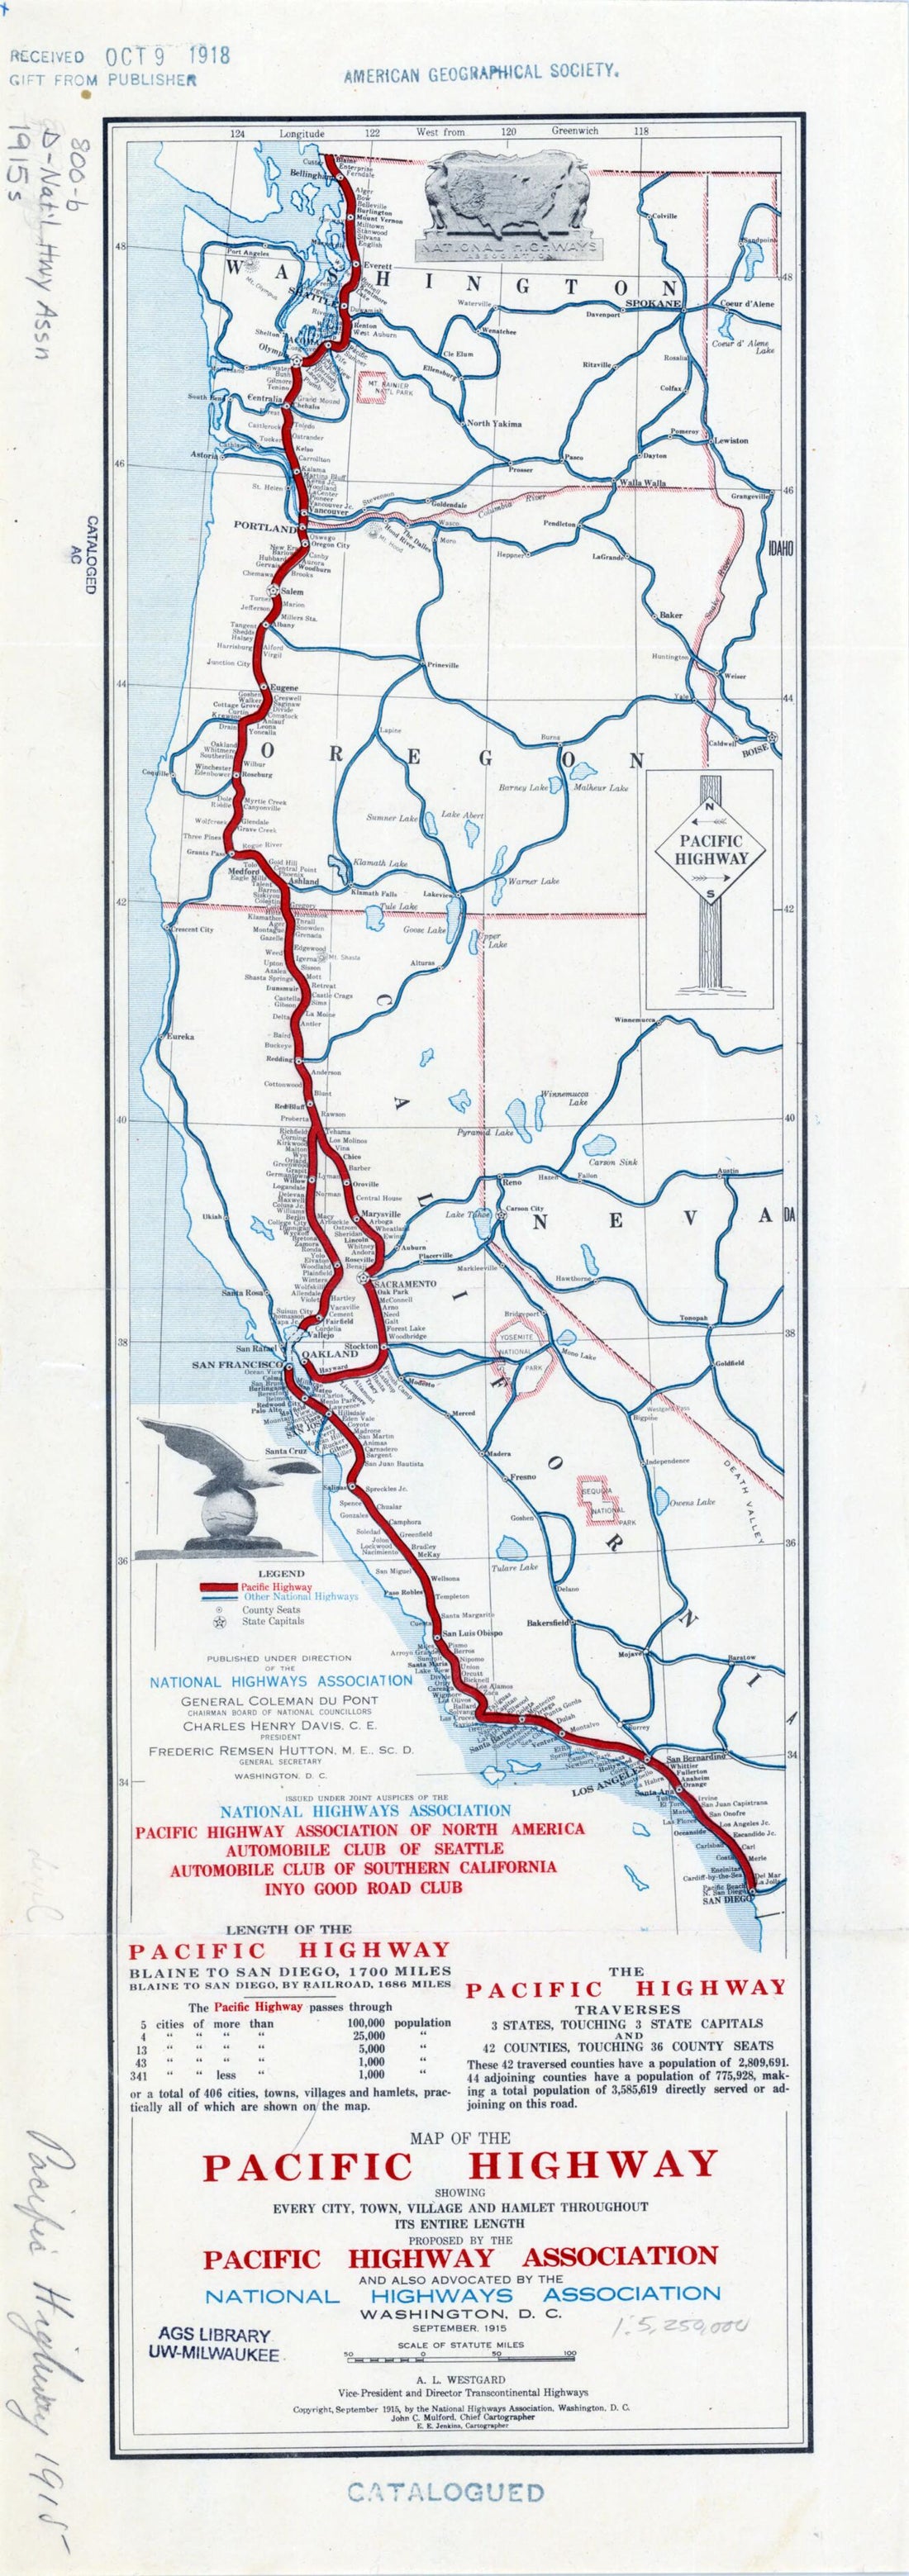 This old map of Map of the Pacific Highway. (Map of the Pacific Highway: Showing Every Town, Village and Hamlet Throughout Its Entire Length) from 1915 was created by  Automobile Club of Seattle,  Automobile Club of Southern California,  Inyo Good Road C